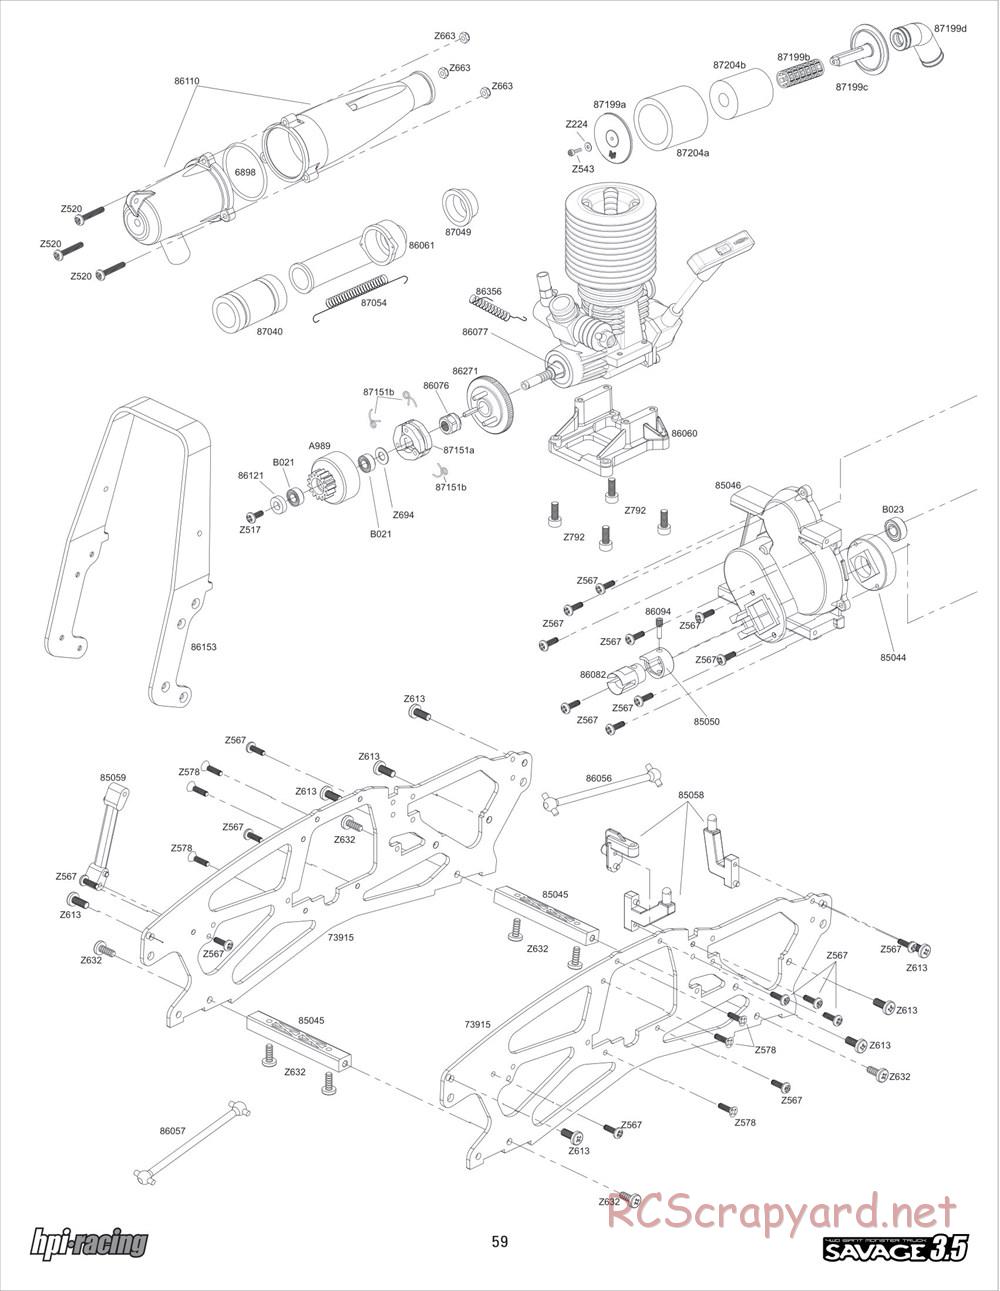 HPI - Savage 3.5 - Exploded View - Page 59